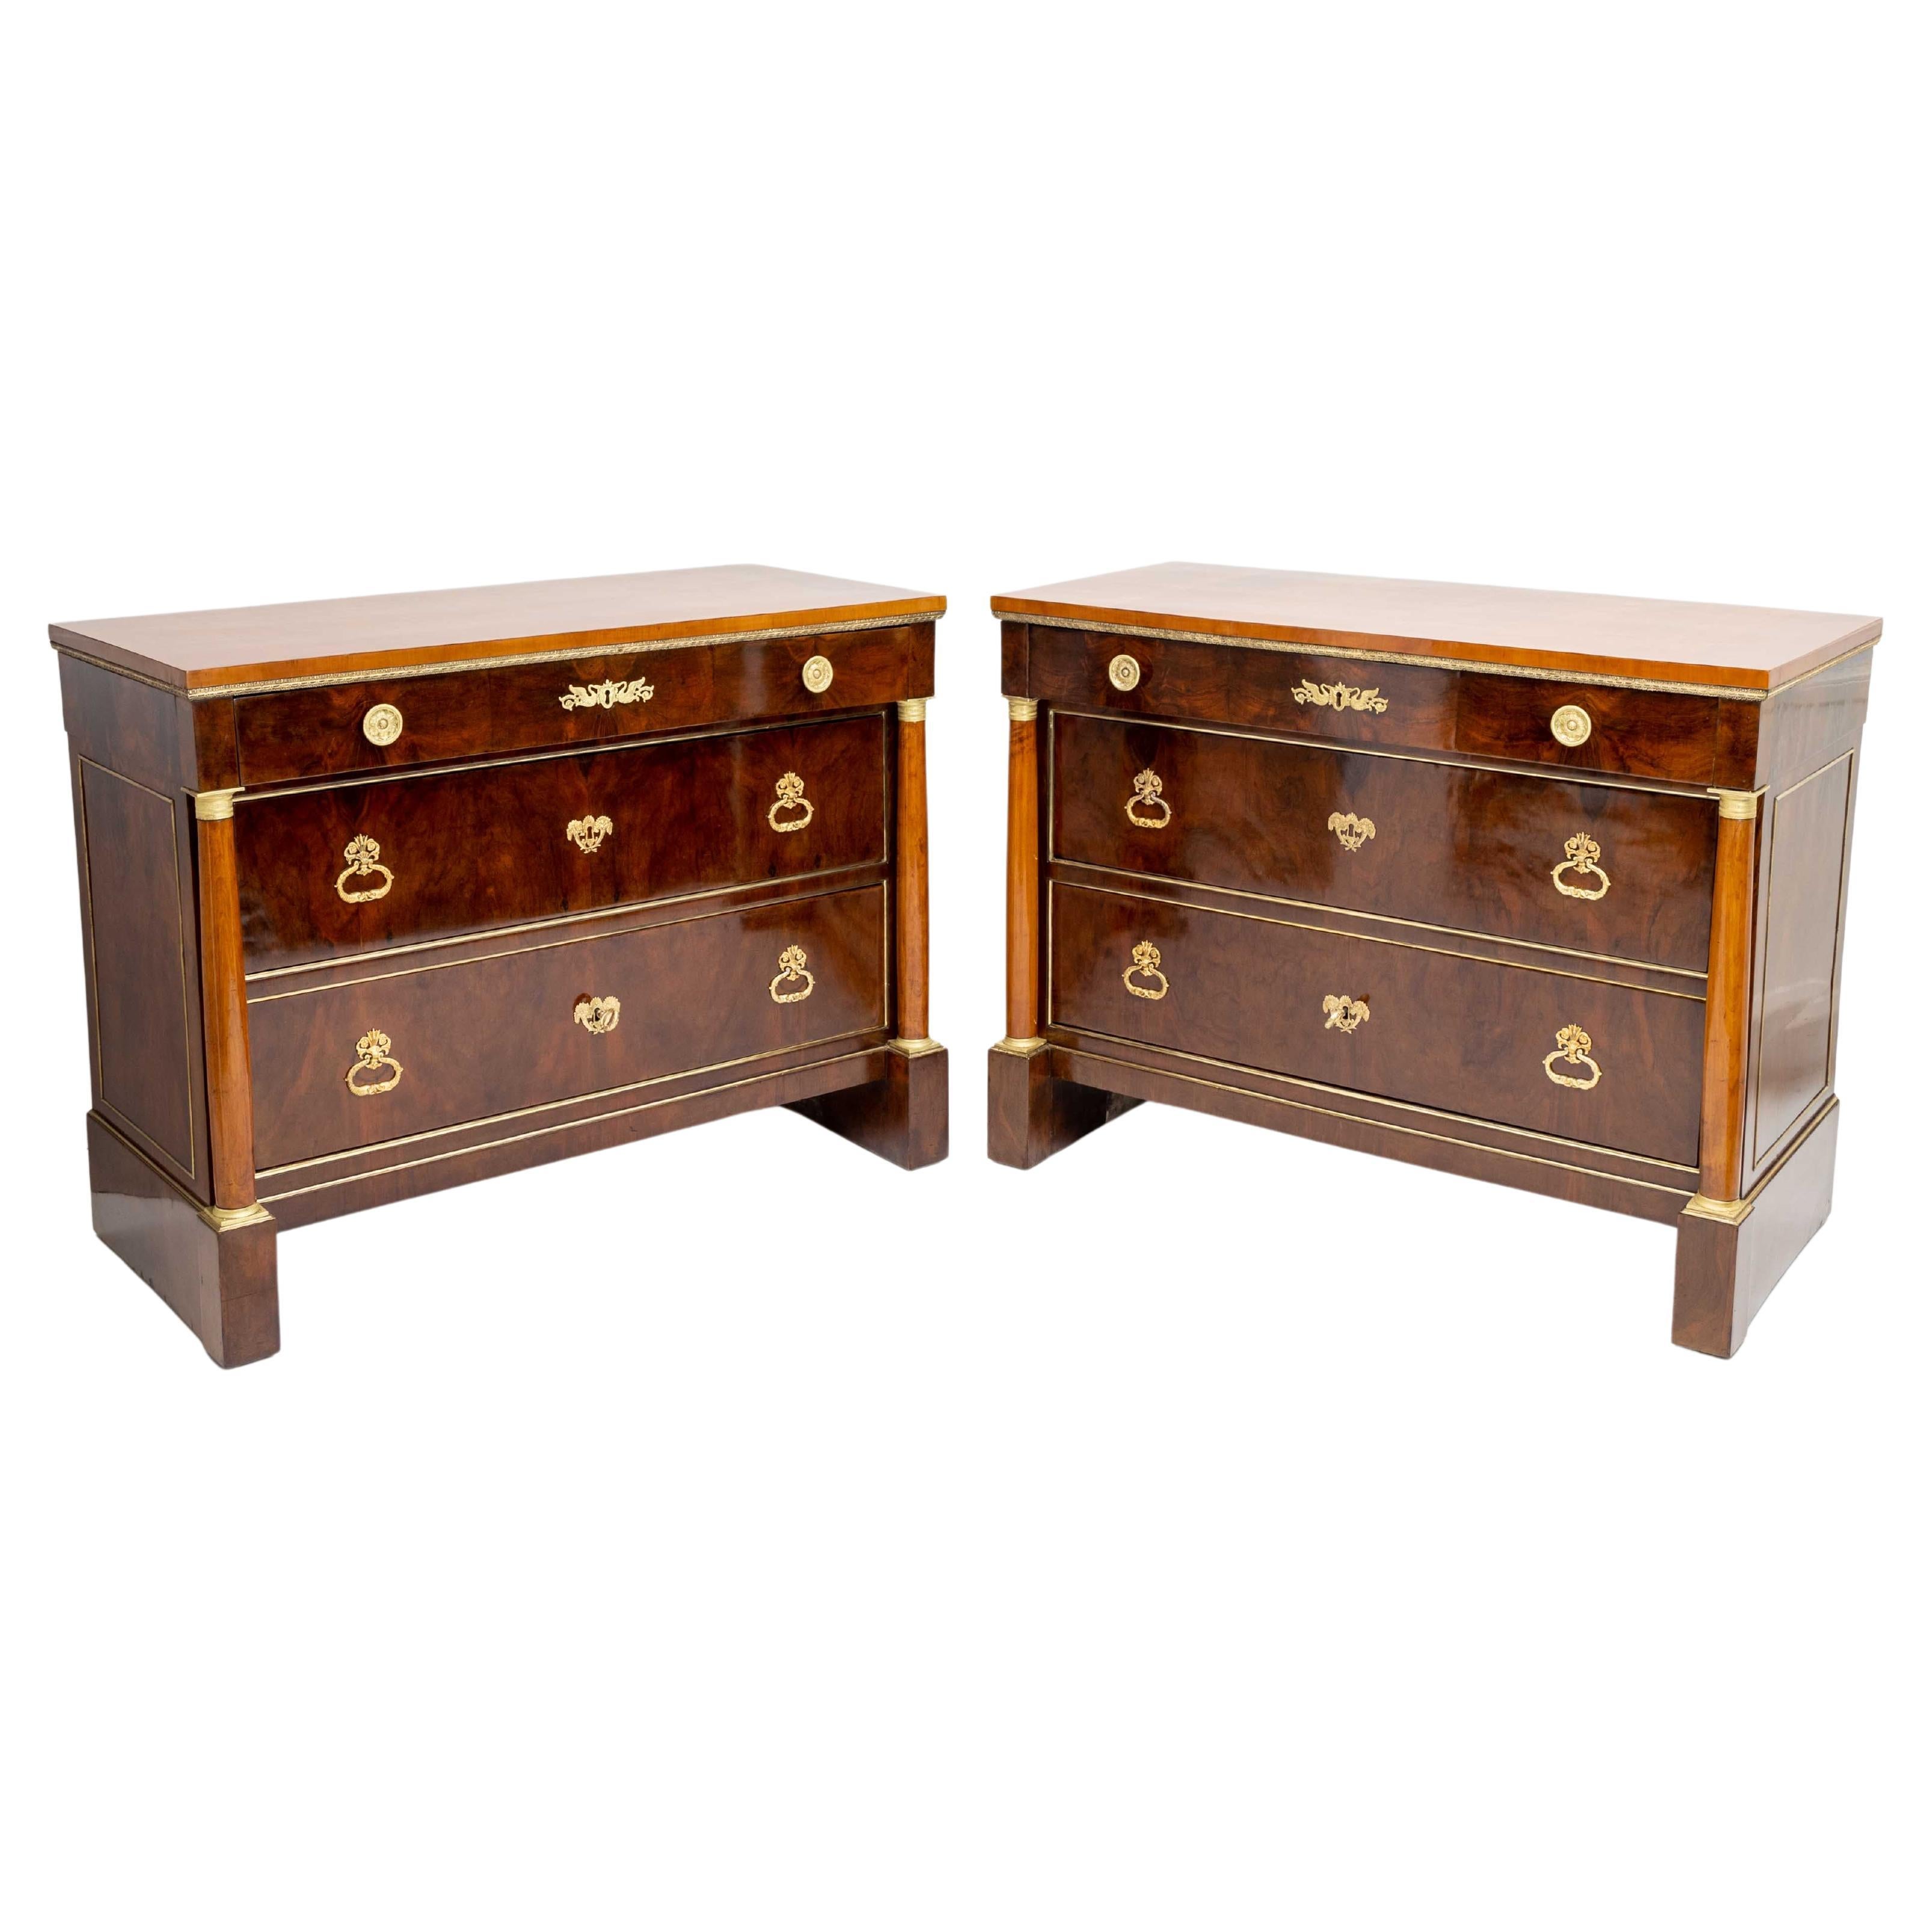 Pair of Empire Chests of Drawers with Fire-Gilt Fittings, Italy Early 19th Cent.